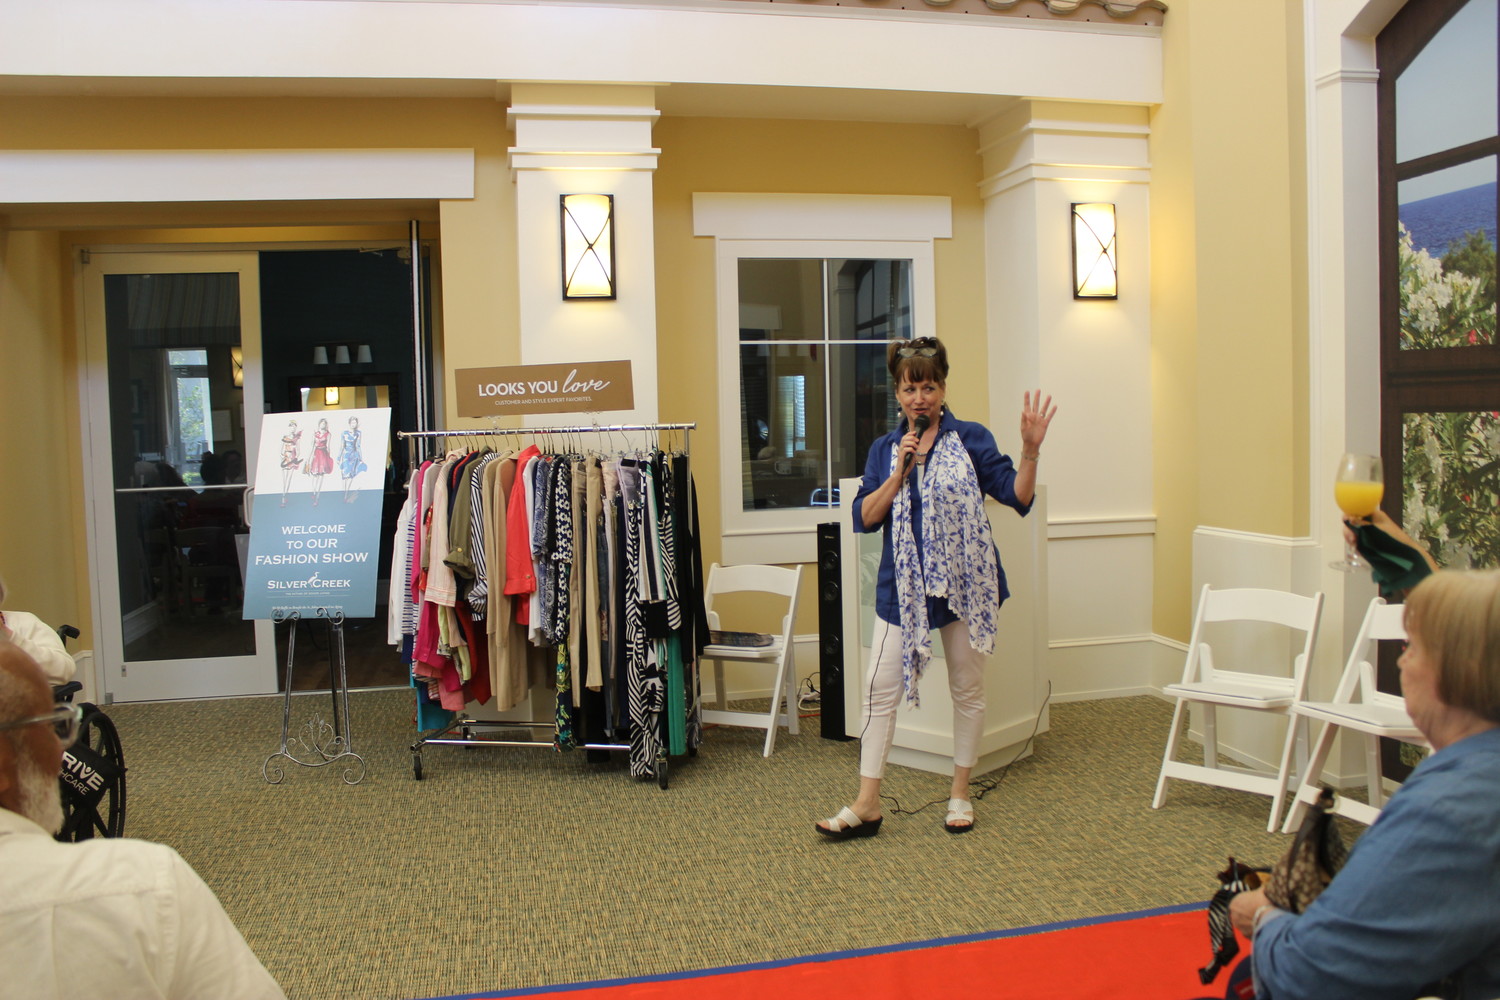 Chico’s Ponte Vedra Assistant Manager Linda Fazio addresses the attendees of the fashion show.